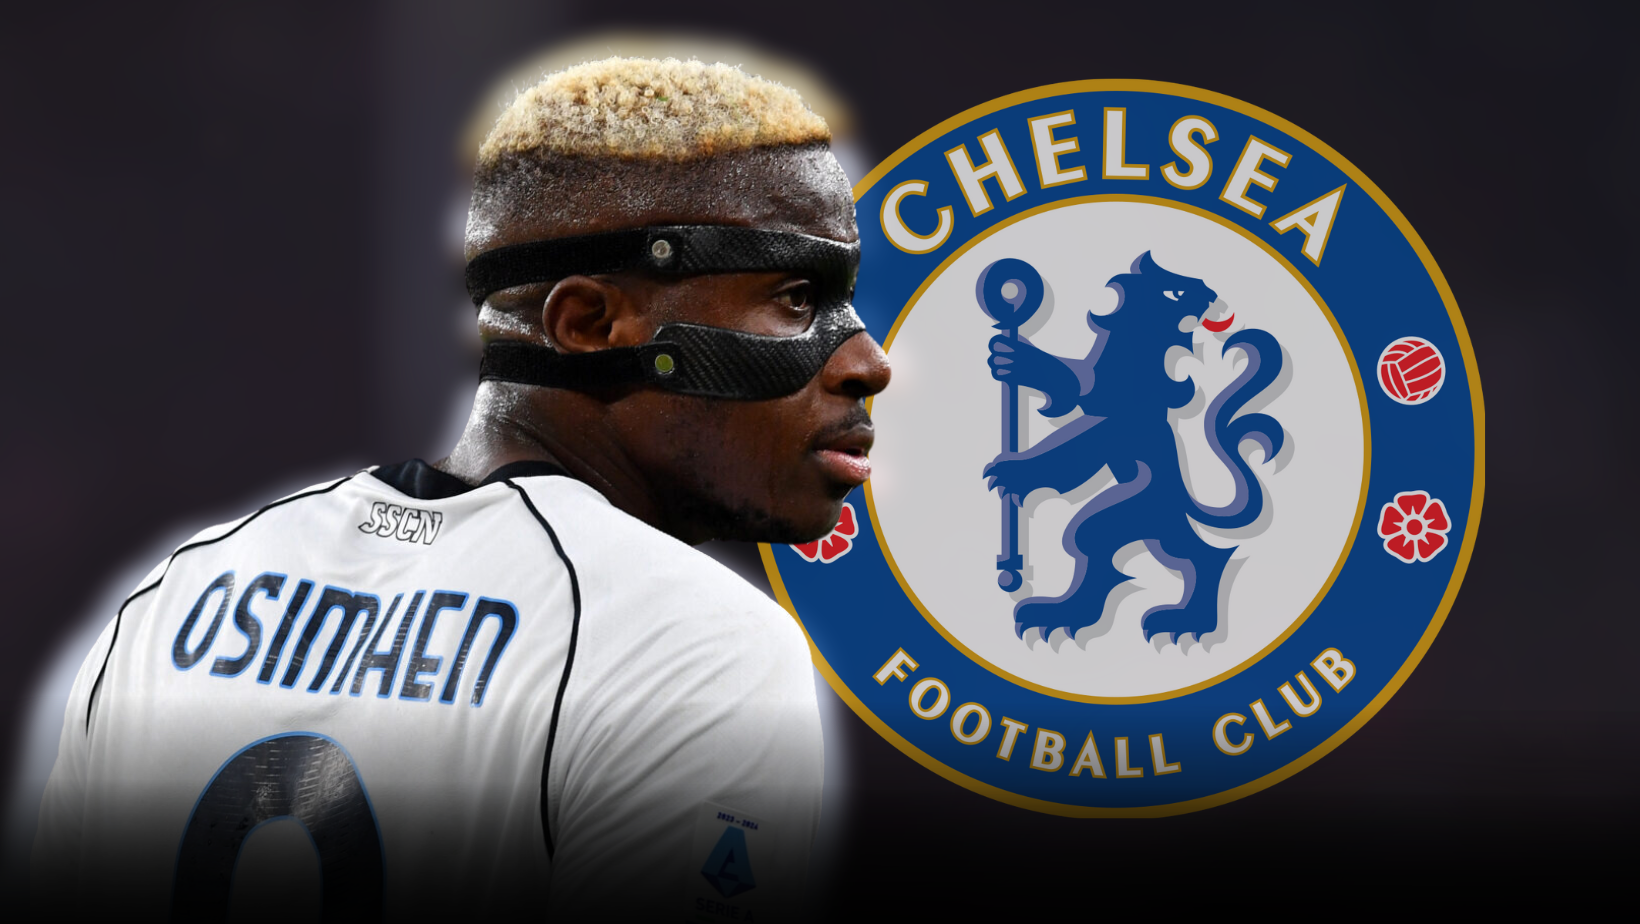 Osimhen is wanted by Chelsea FB